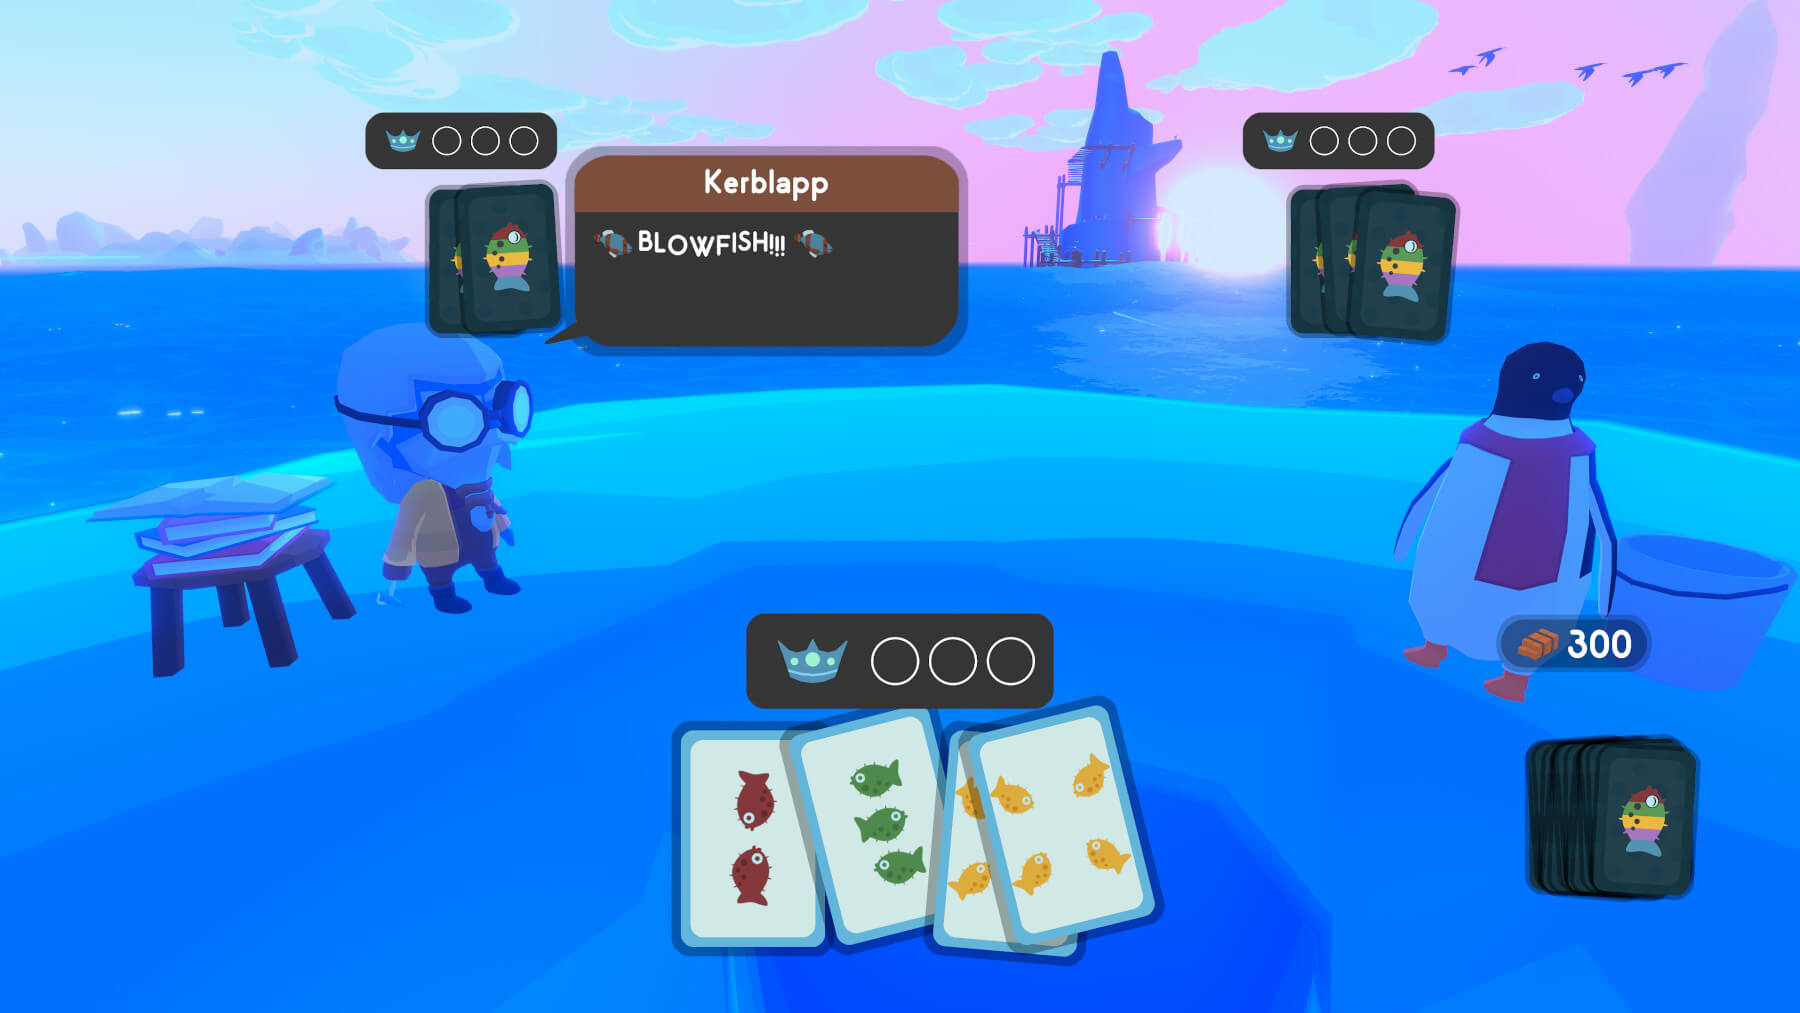 A blue humanoid character, a scarf-clad penguin, and the player (not shown) play a card game involving fish.